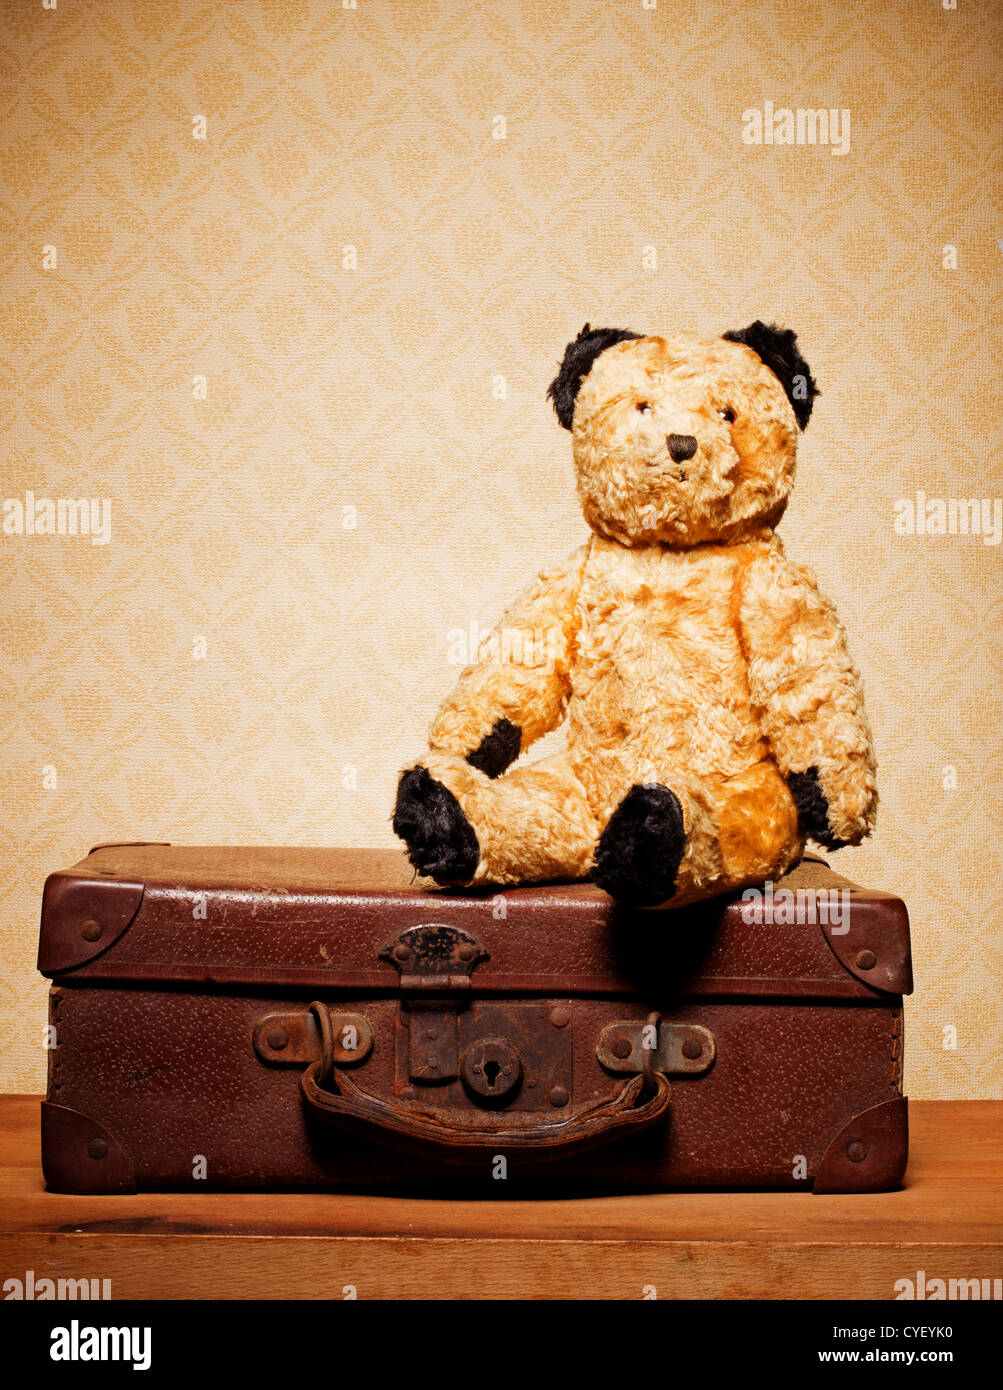 Old vintage teddy bear and old leather suitcase, bygones and memorabilia  Stock Photo - Alamy